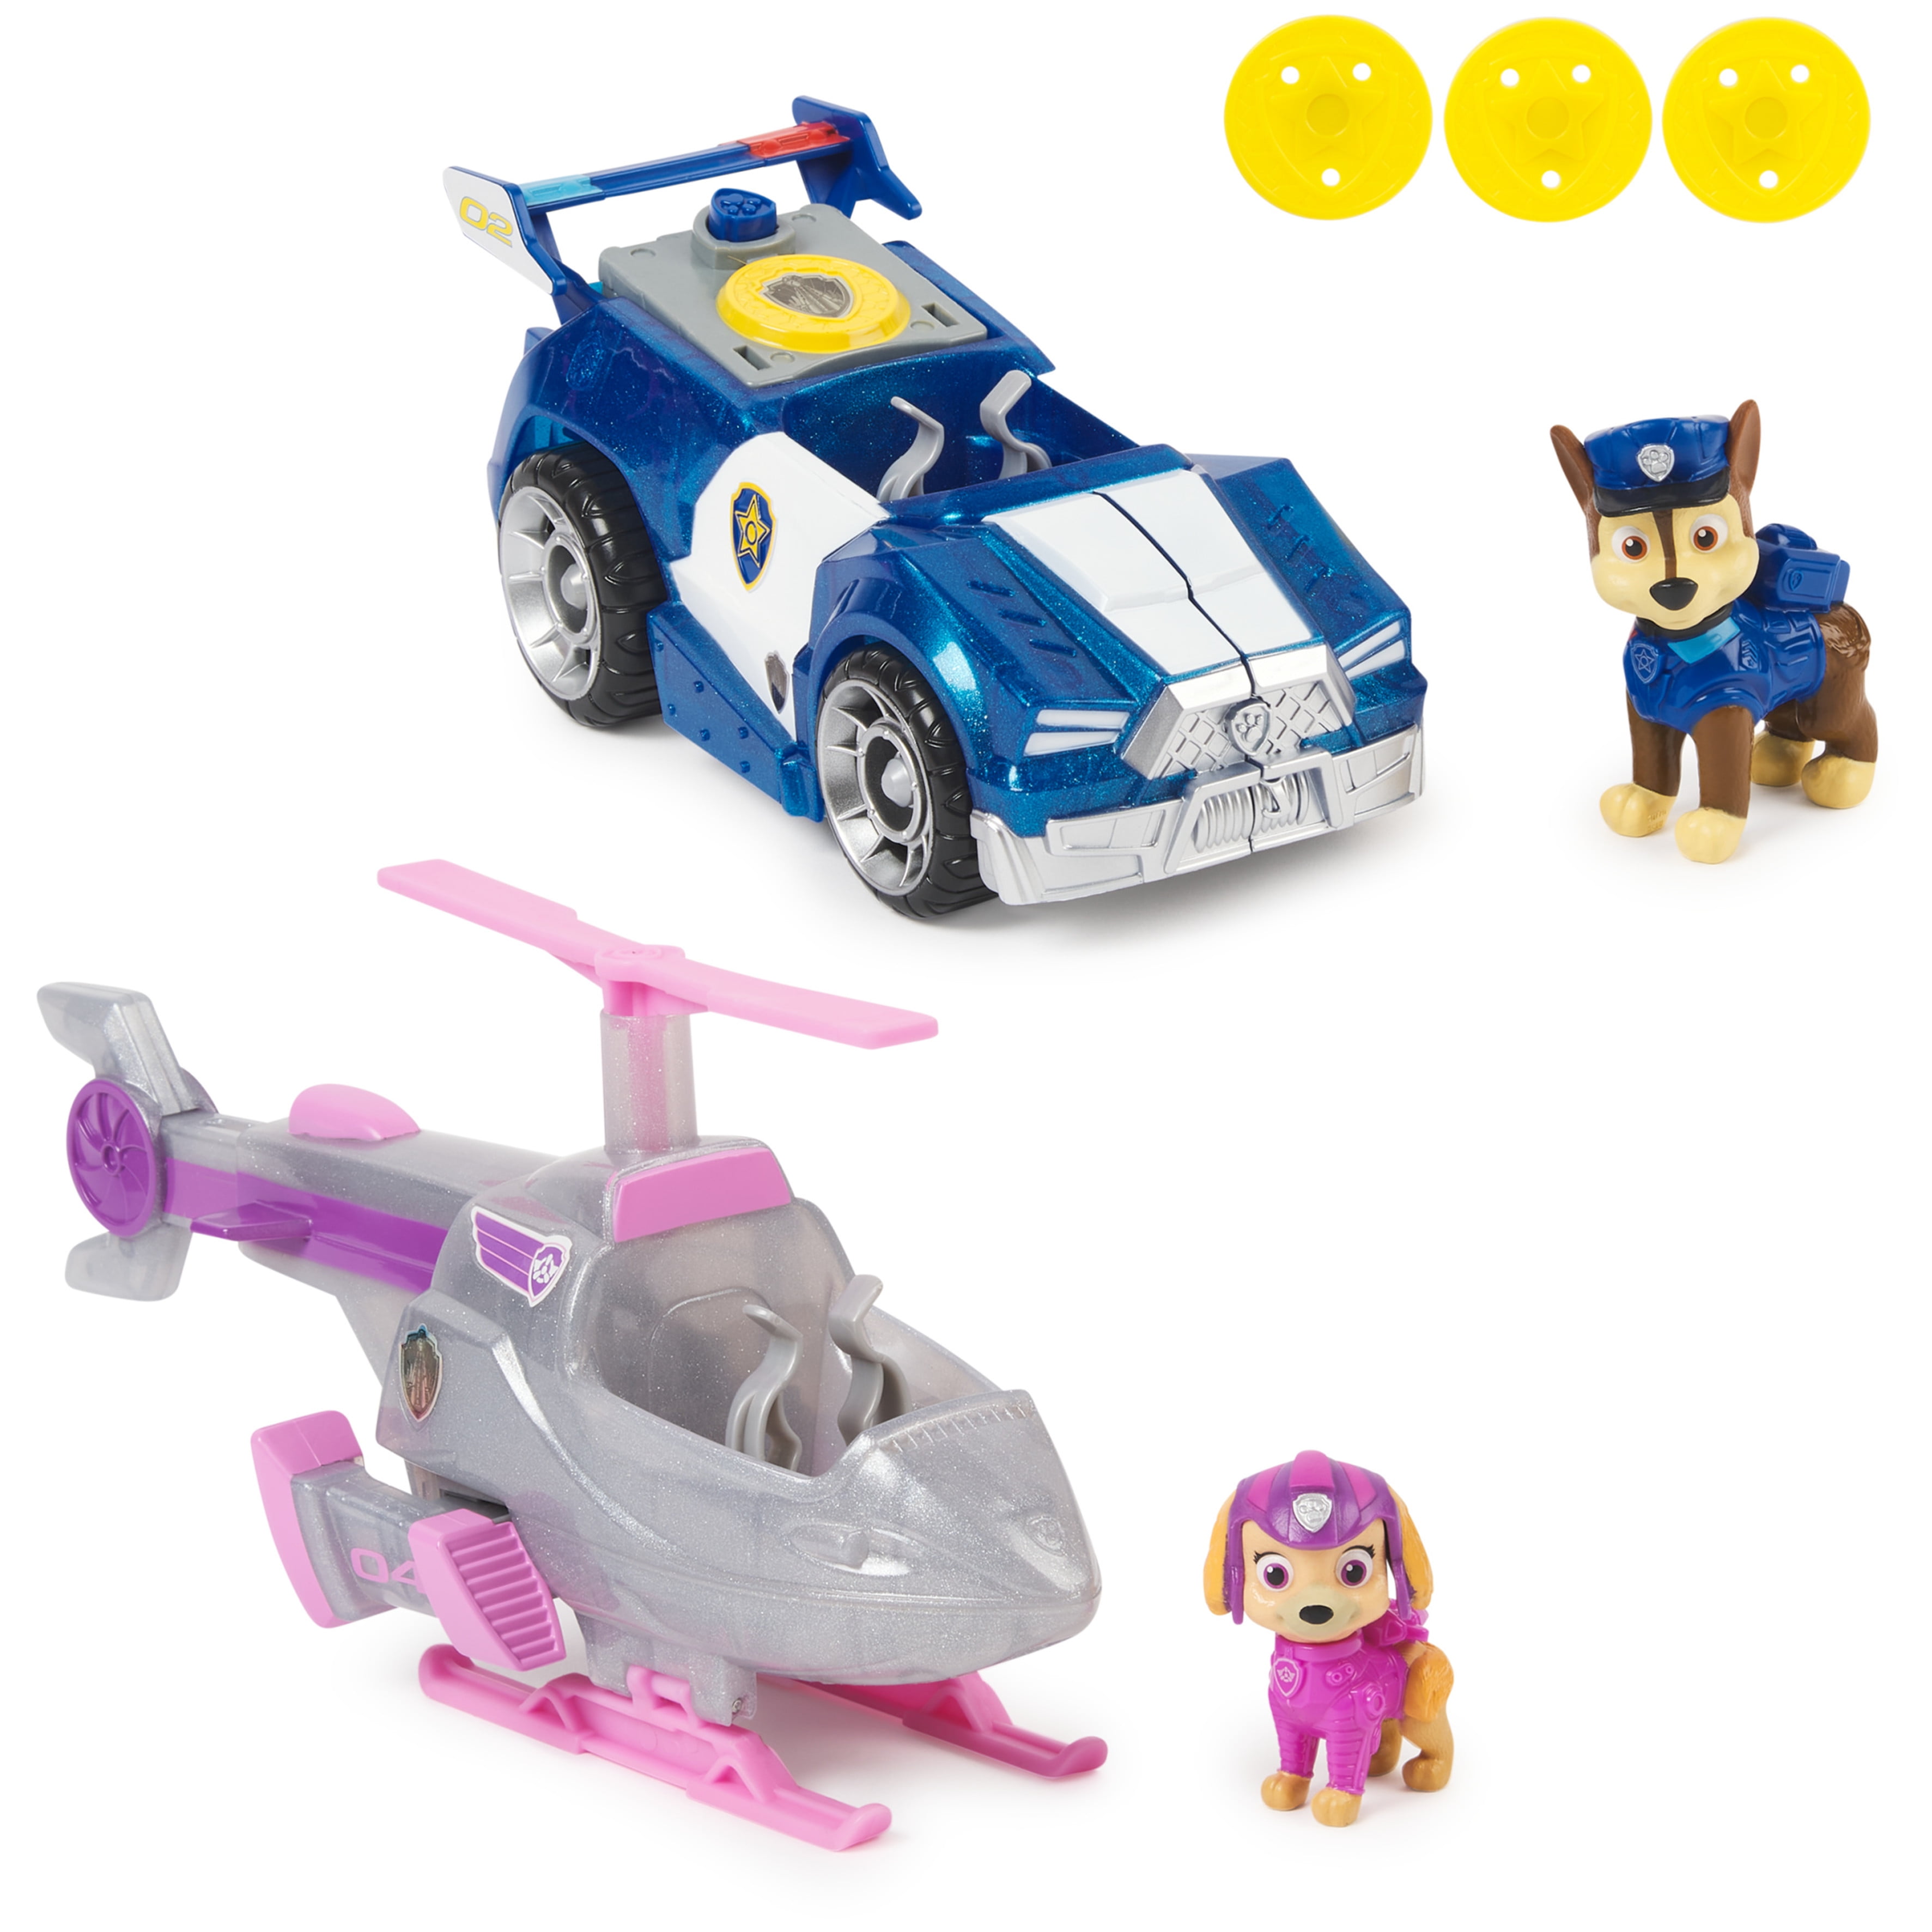 PAW Patrol: The Movie, Chase & Skye Figure and Vehicle Set for Kids Ages 3+